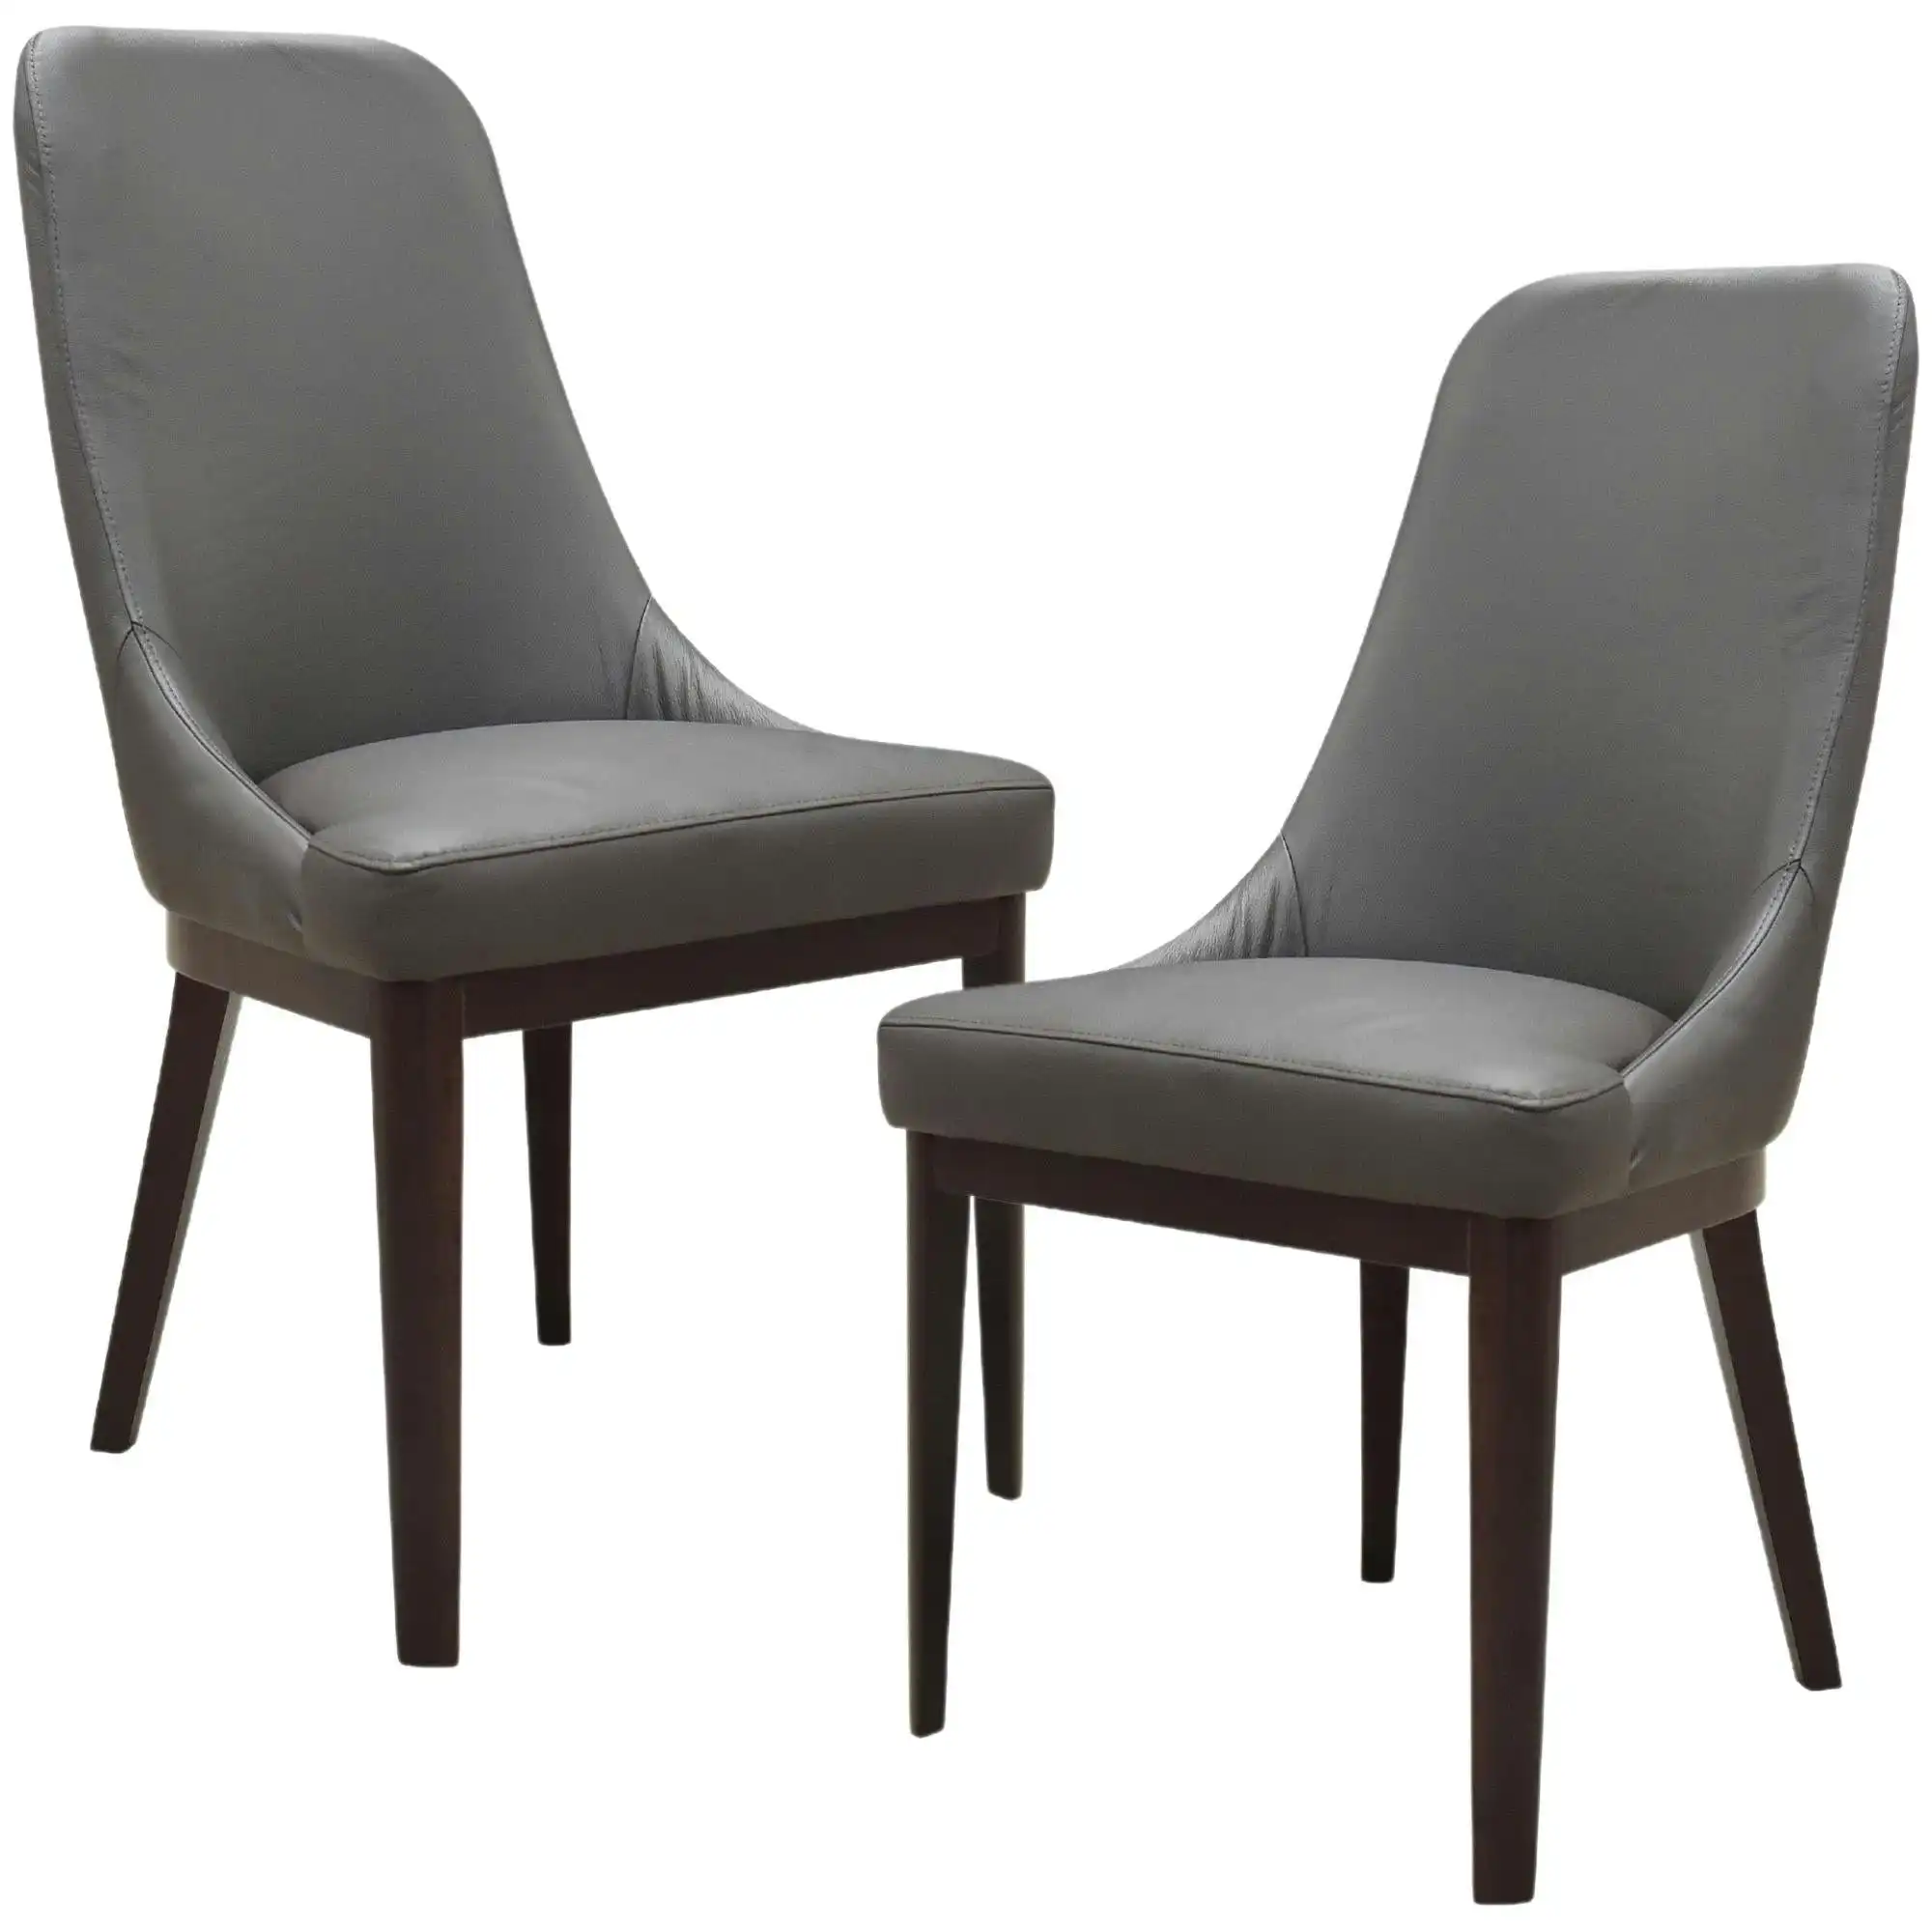 Claire Set of 2 Leather Dining Chair Dark Brown